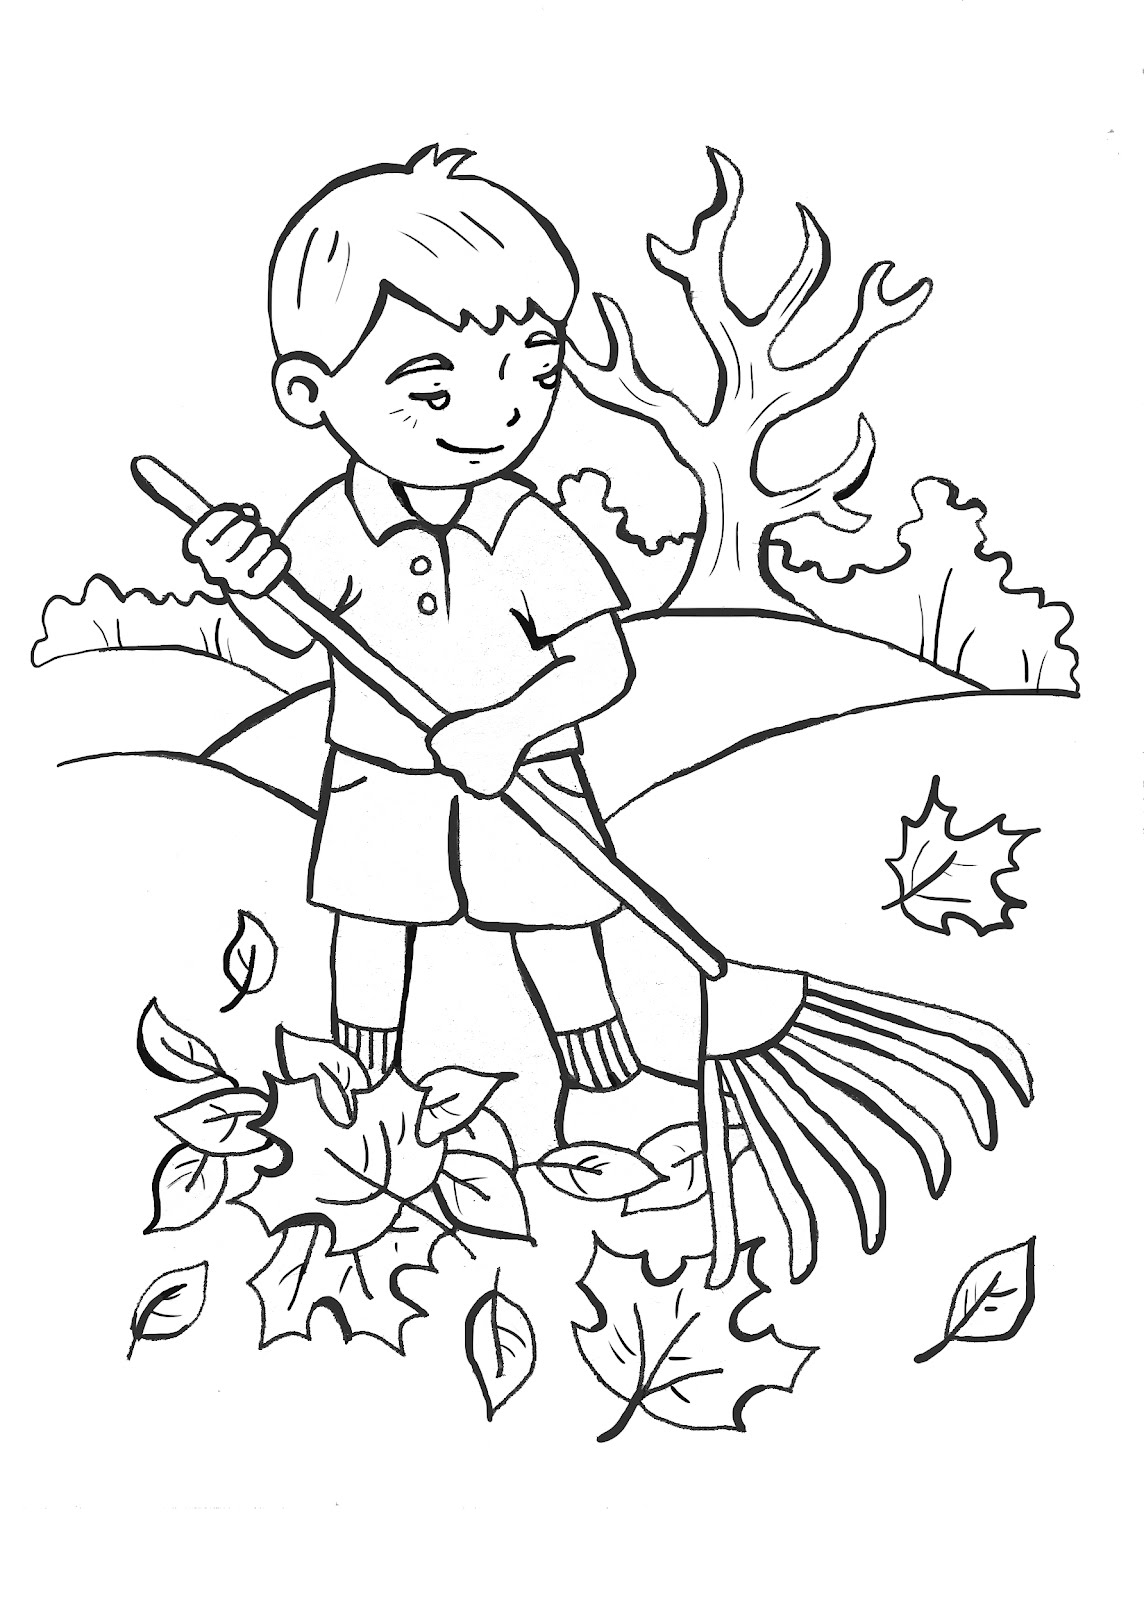 Illustration Alchemy  Lds Mobile Apps Coloring Pages